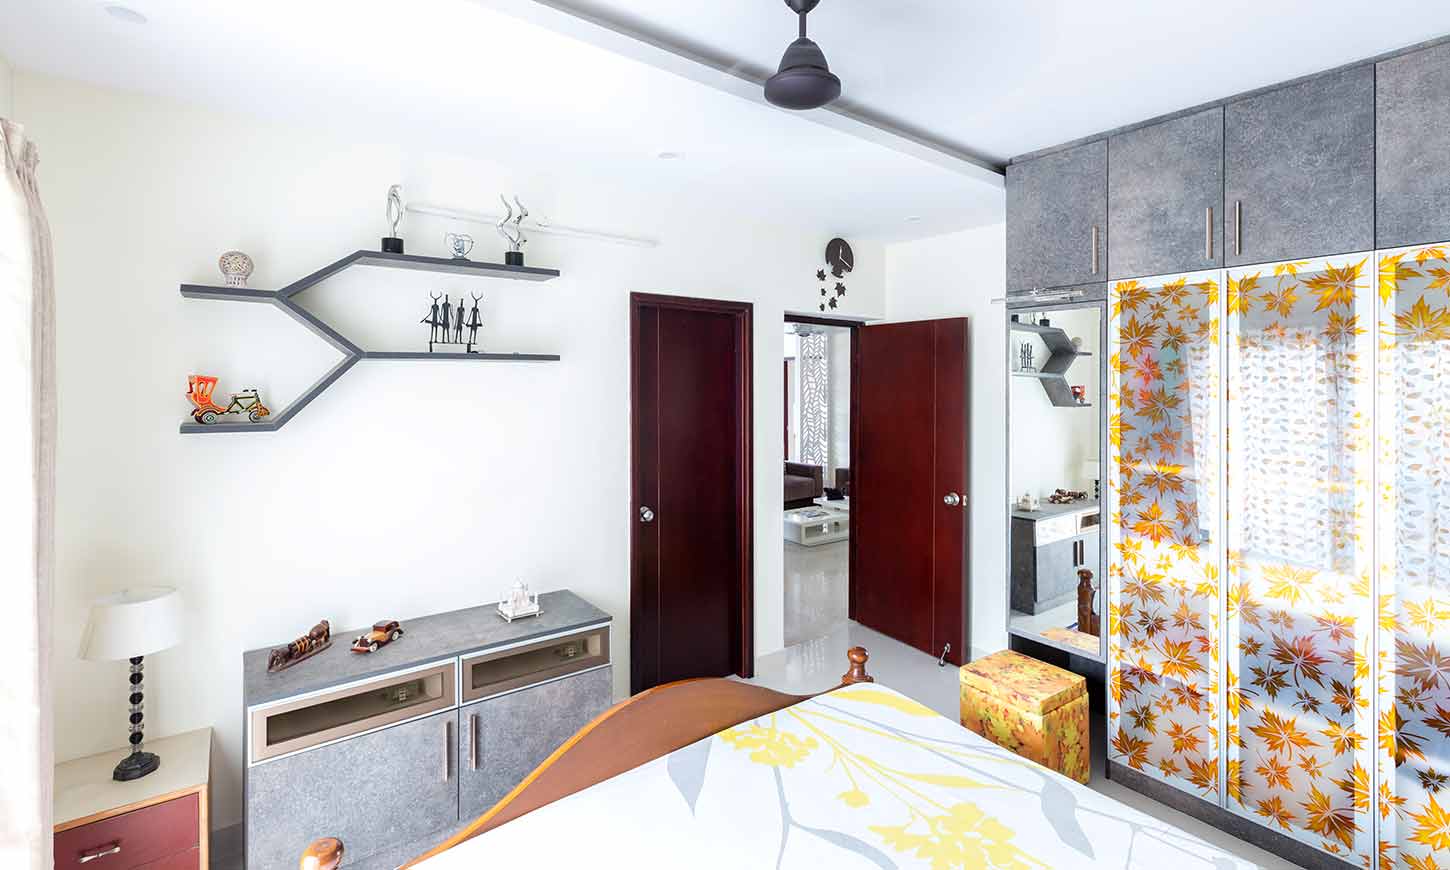 Bedroom with loft and wardrobe designed by best budget interior designers in bangalore